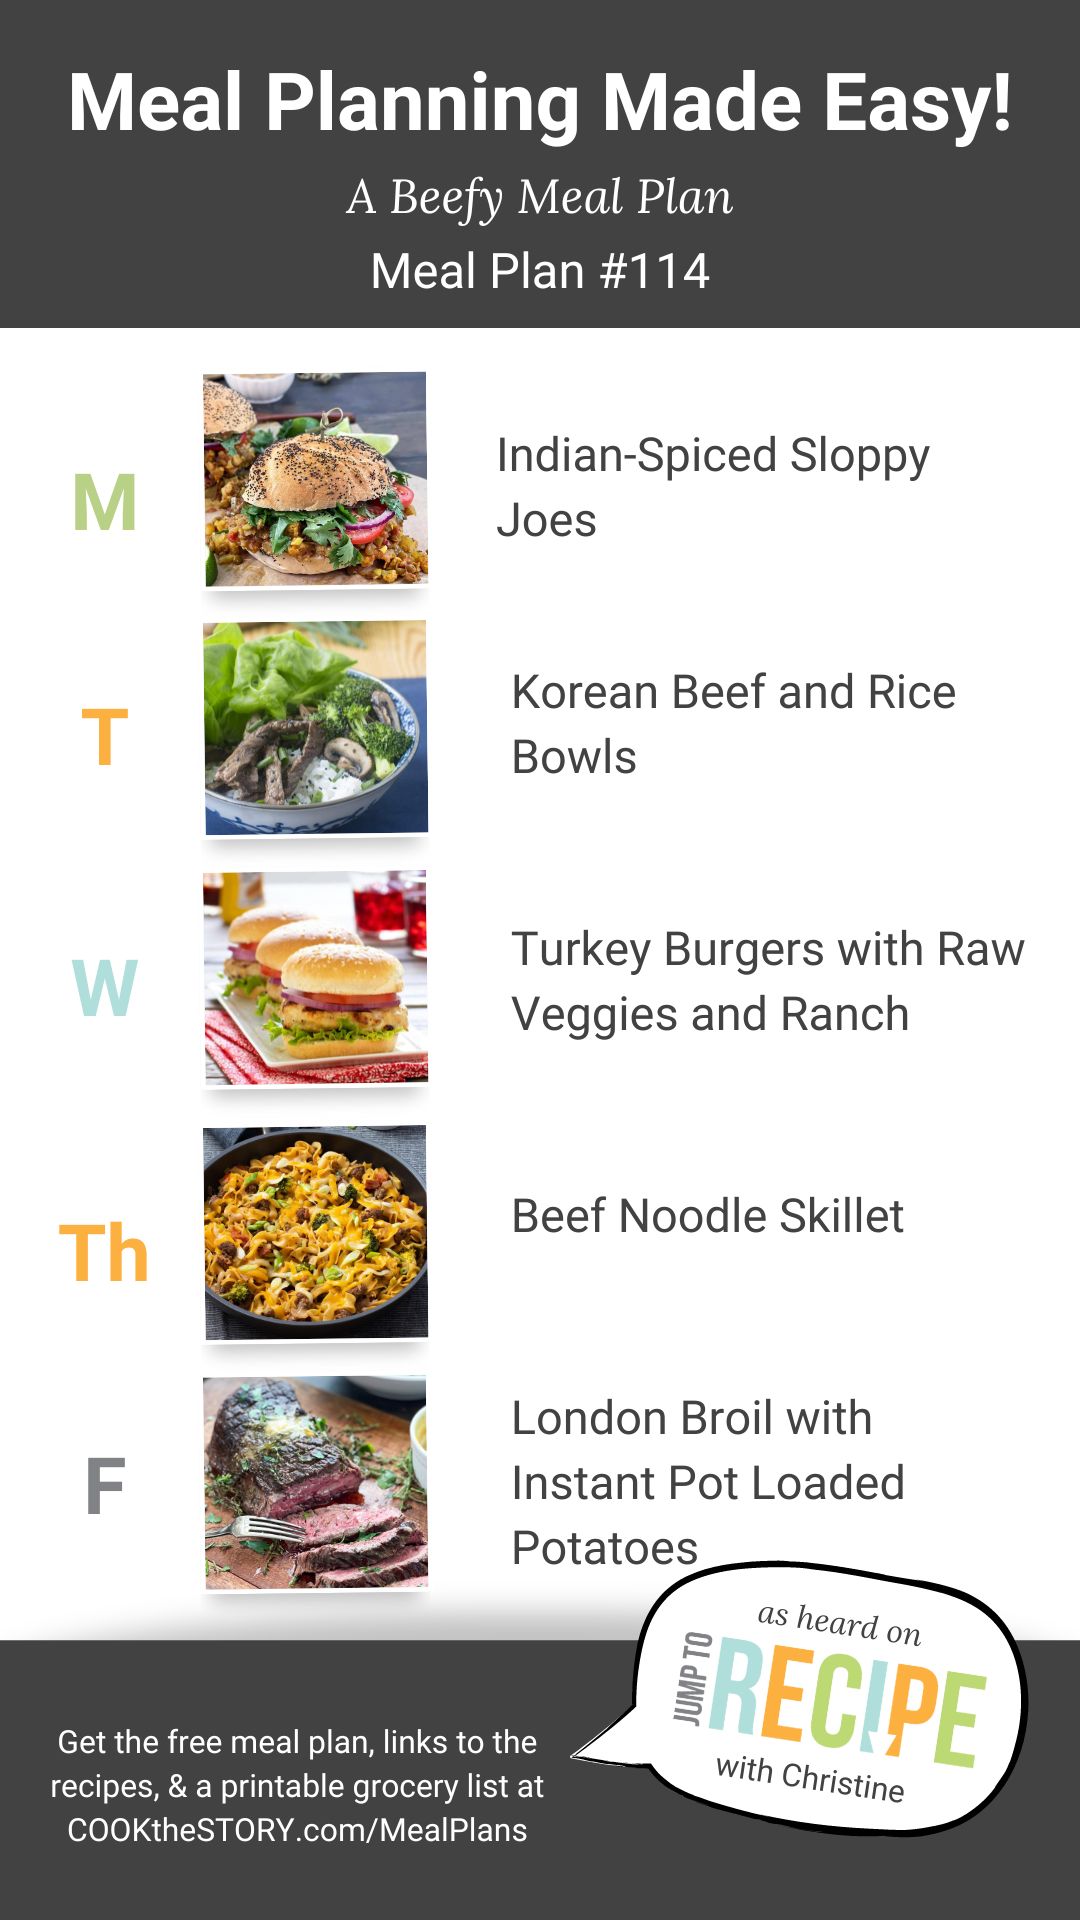 Meal Plan #114: A Beefy Meal Plan